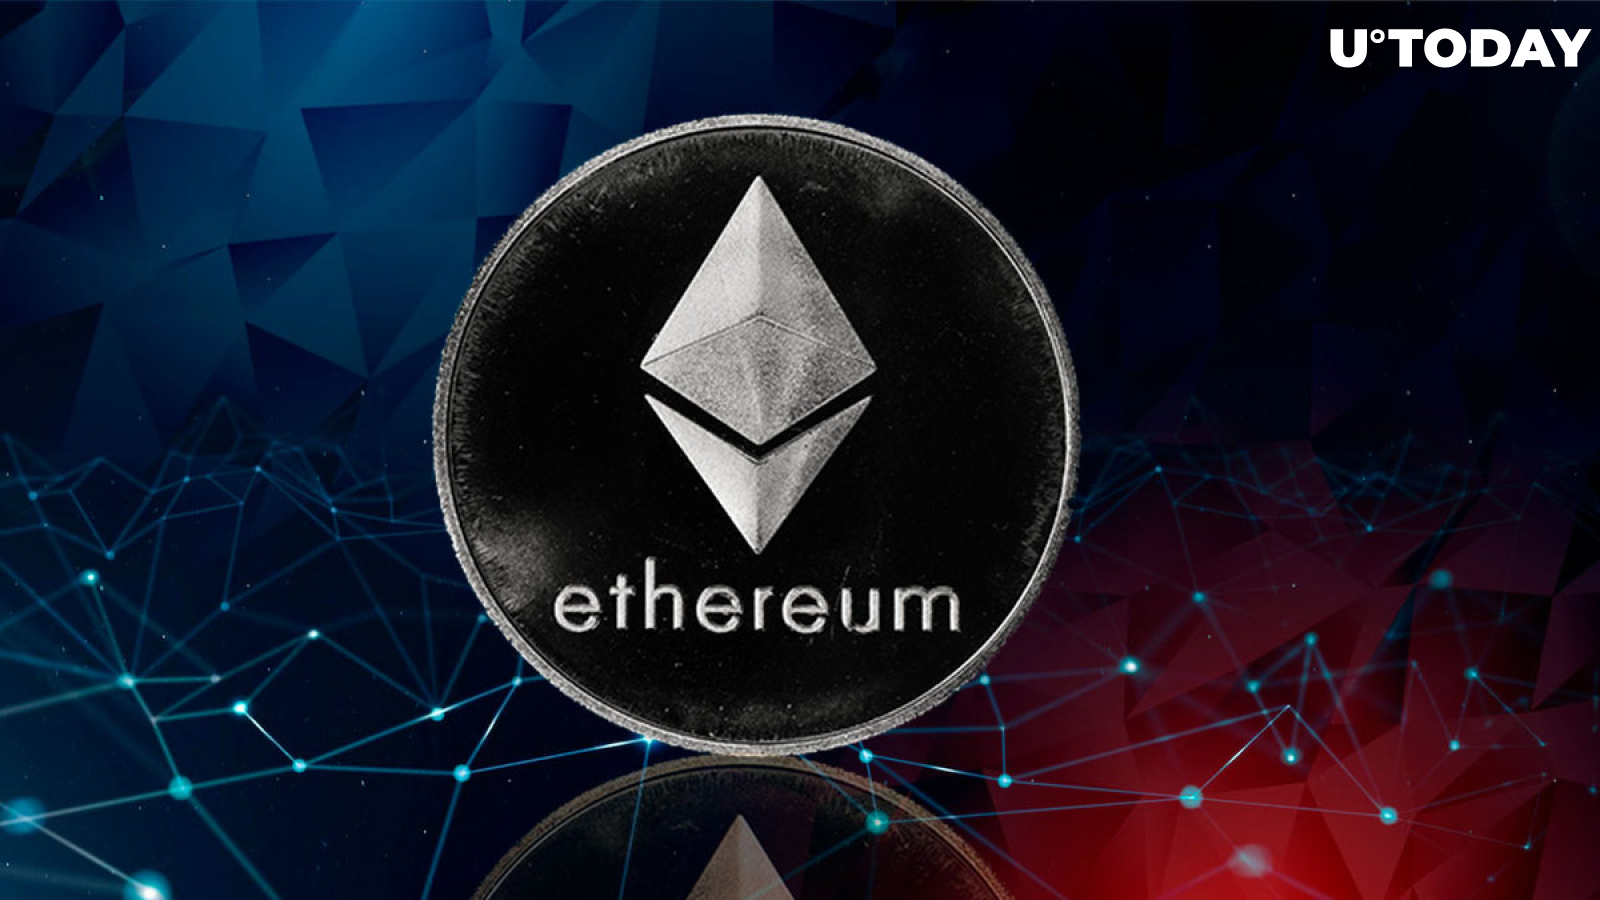 Ethereum Price Performance Could Guide Other Altcoins, Bloomberg's McGlone Says